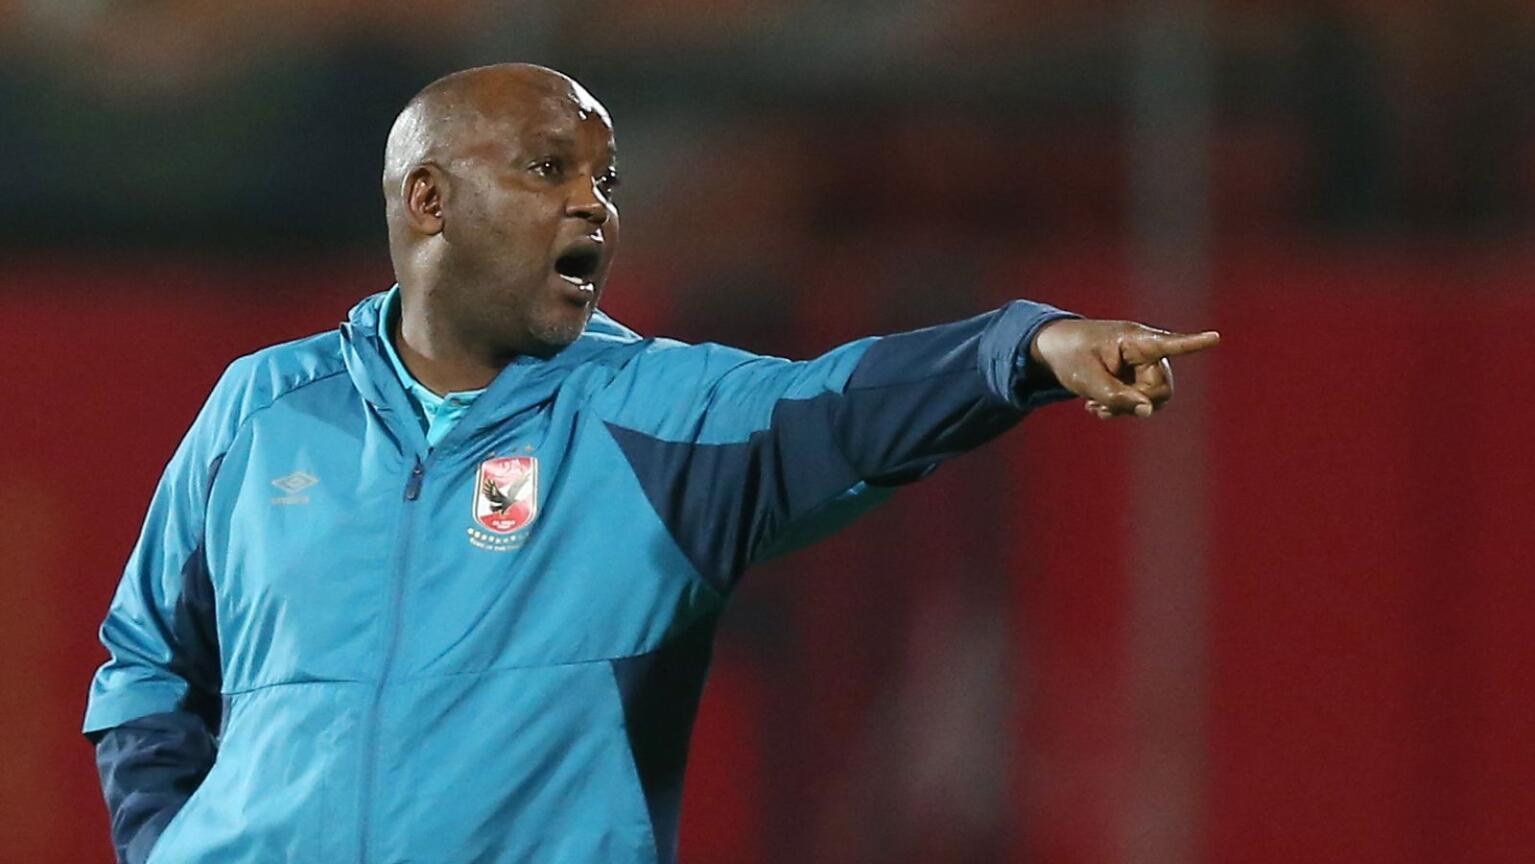 Former Al Ahly's coach Pitso Mosimane reacts during the Caf Champions League soccer match between Al Ahly SC and ES Setif in Cairo, Egypt, on 7 May 2022